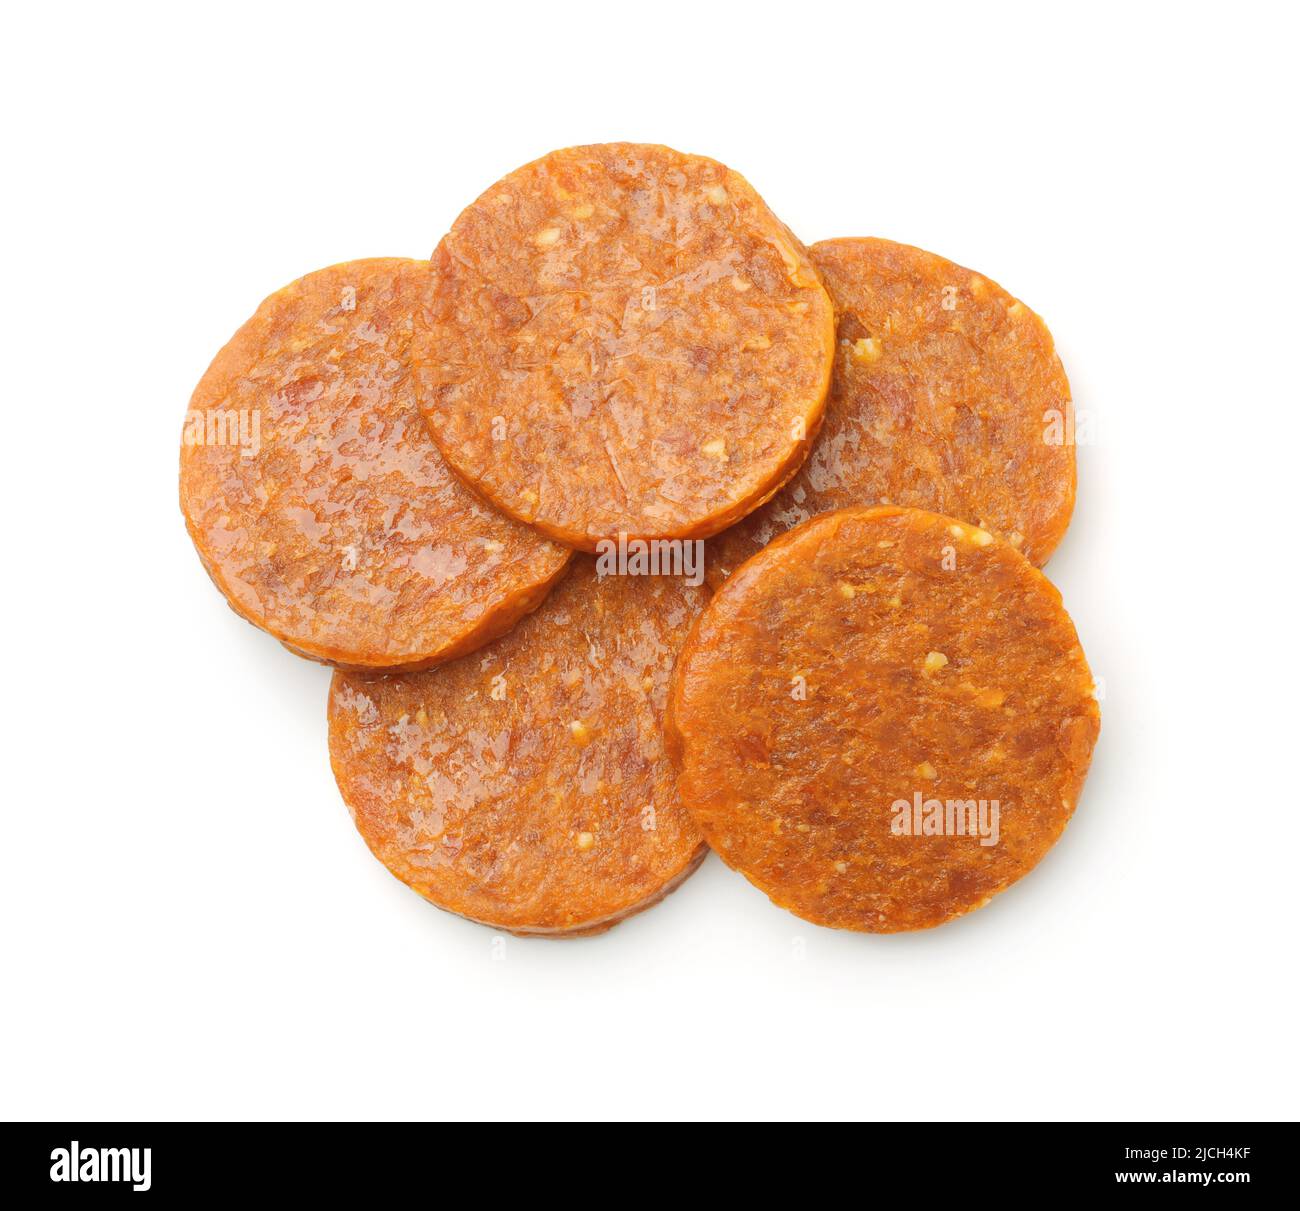 Top view of organic pressed dried apricot and almond discs dessert isolated on white Stock Photo